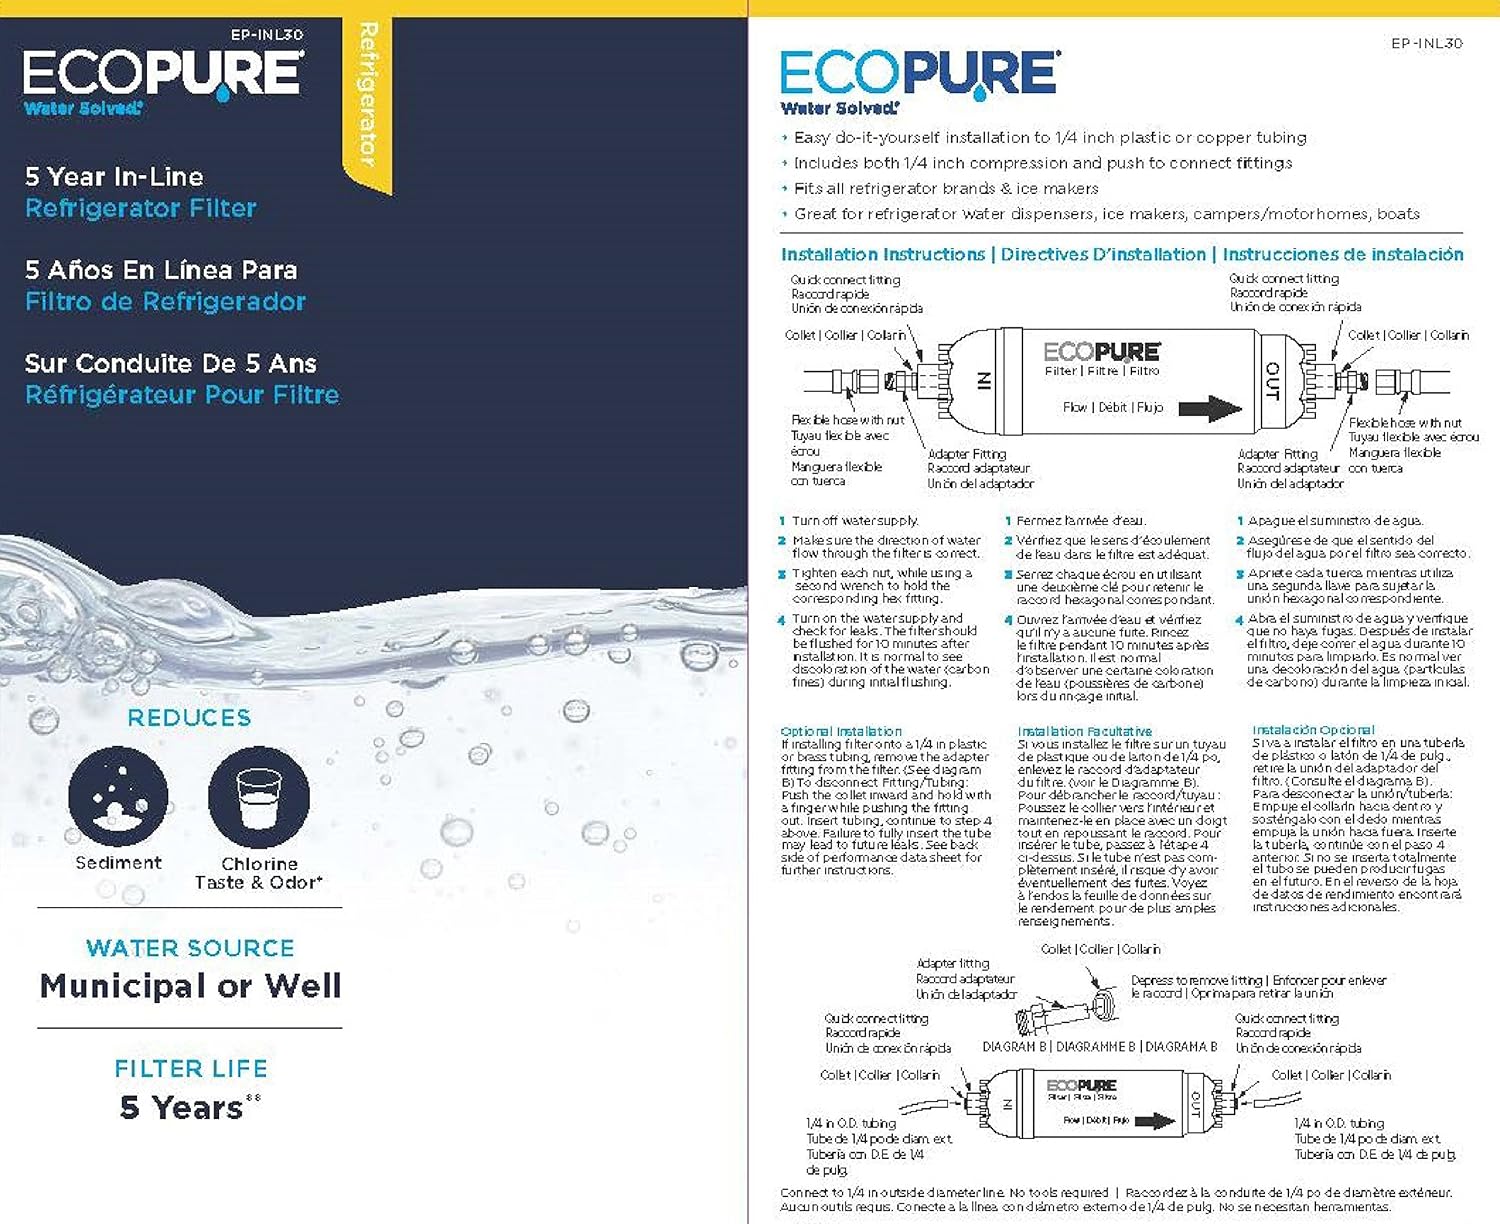 KX Tech EcoPure EPINL30 5 Year in-Line Refrigerator Filter-Universal Includes Both 1/4" Compression and Push to Connect Fittings